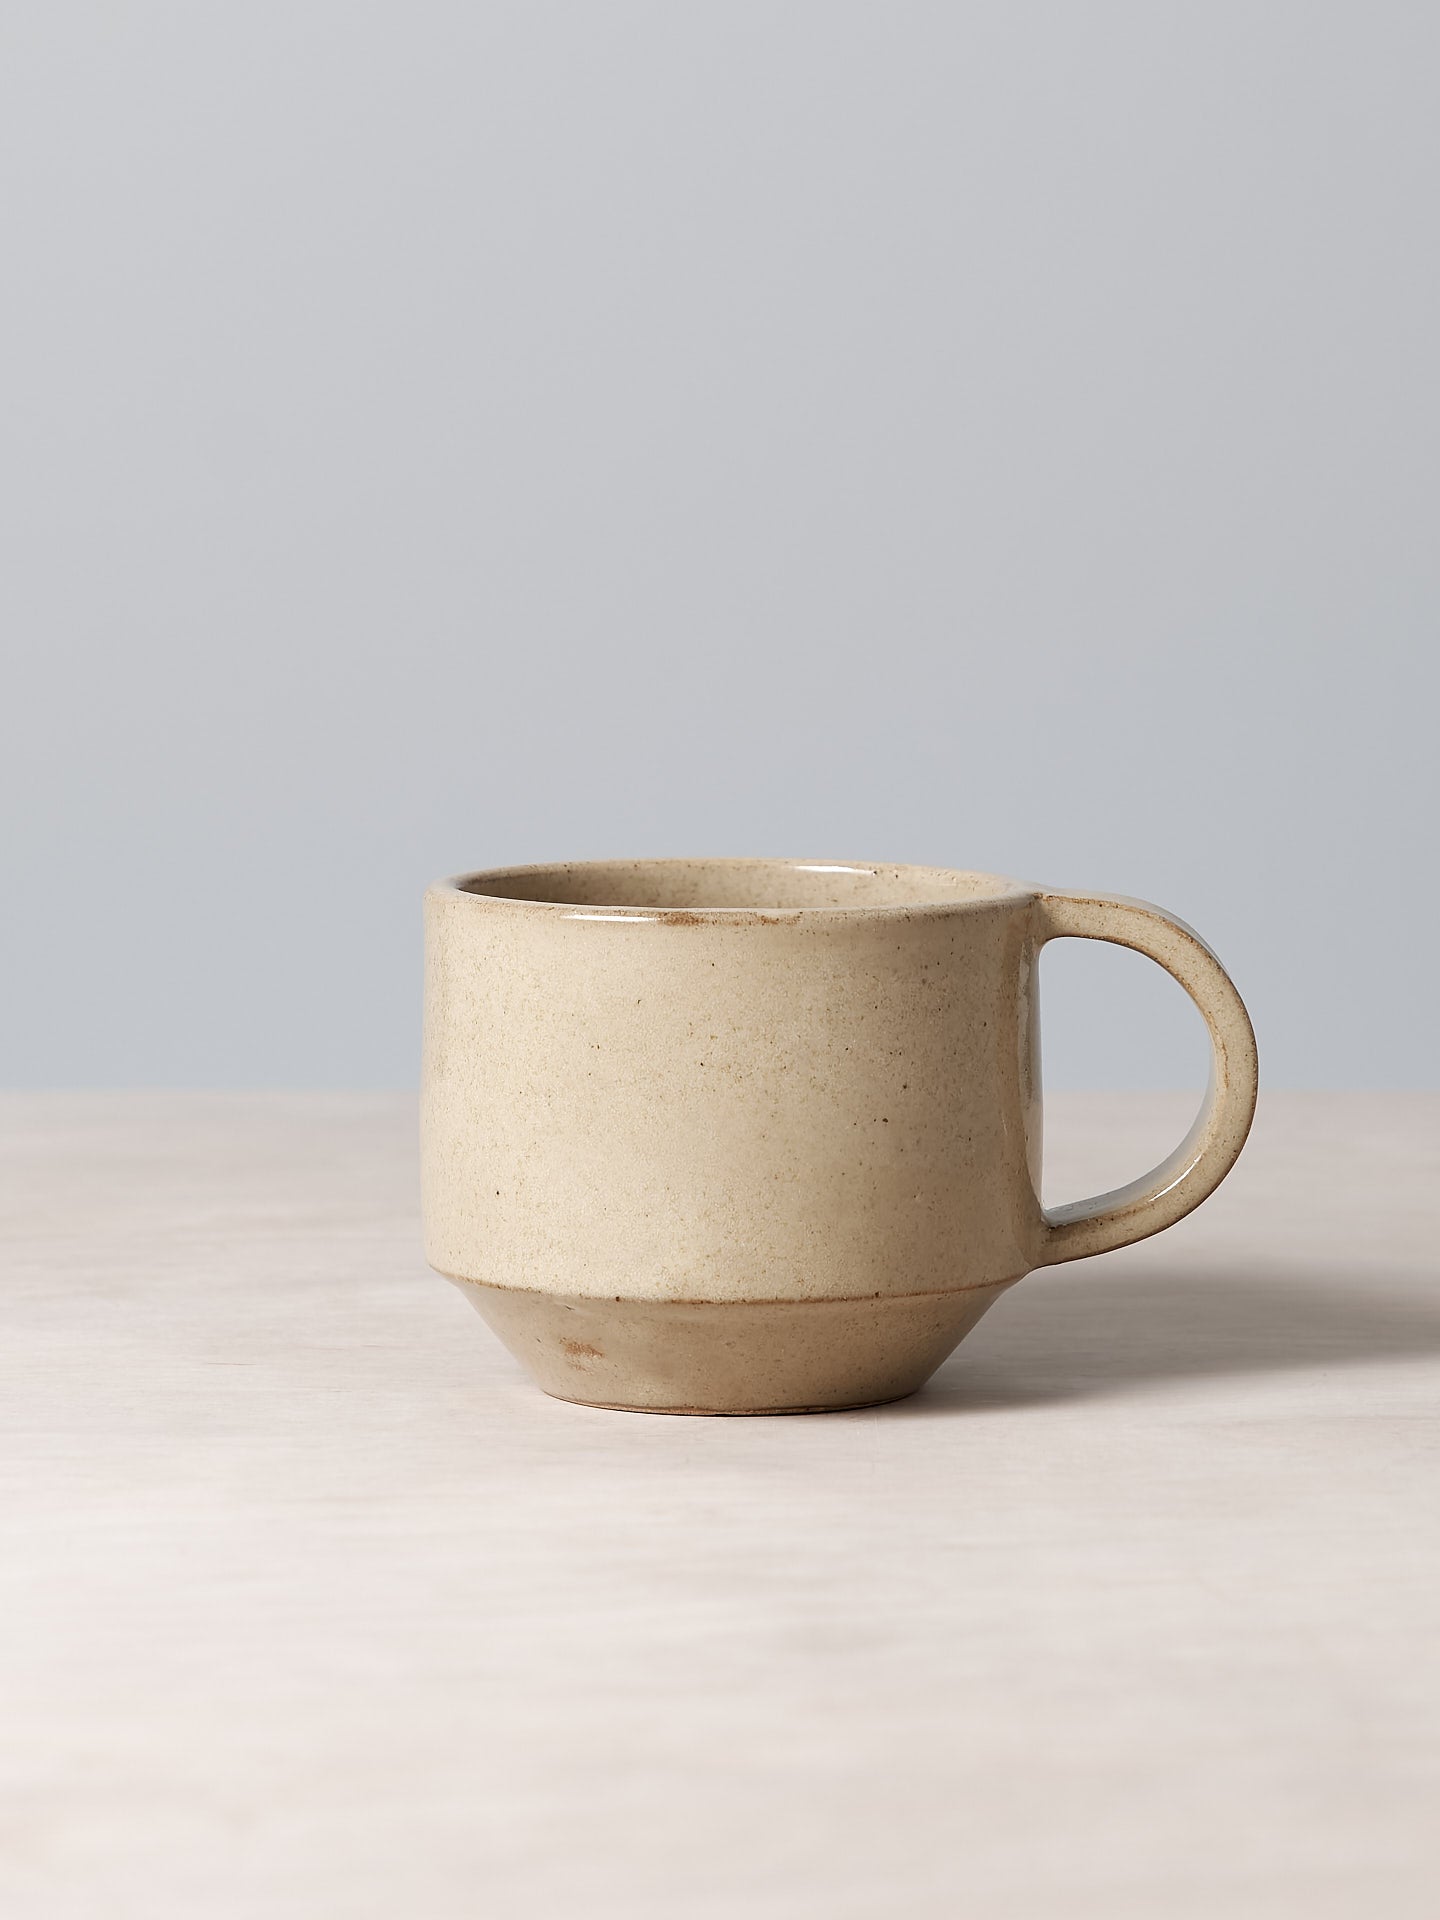 A Richard Beauchamp C-handled Stacking Mug – Sand sitting on top of a table.